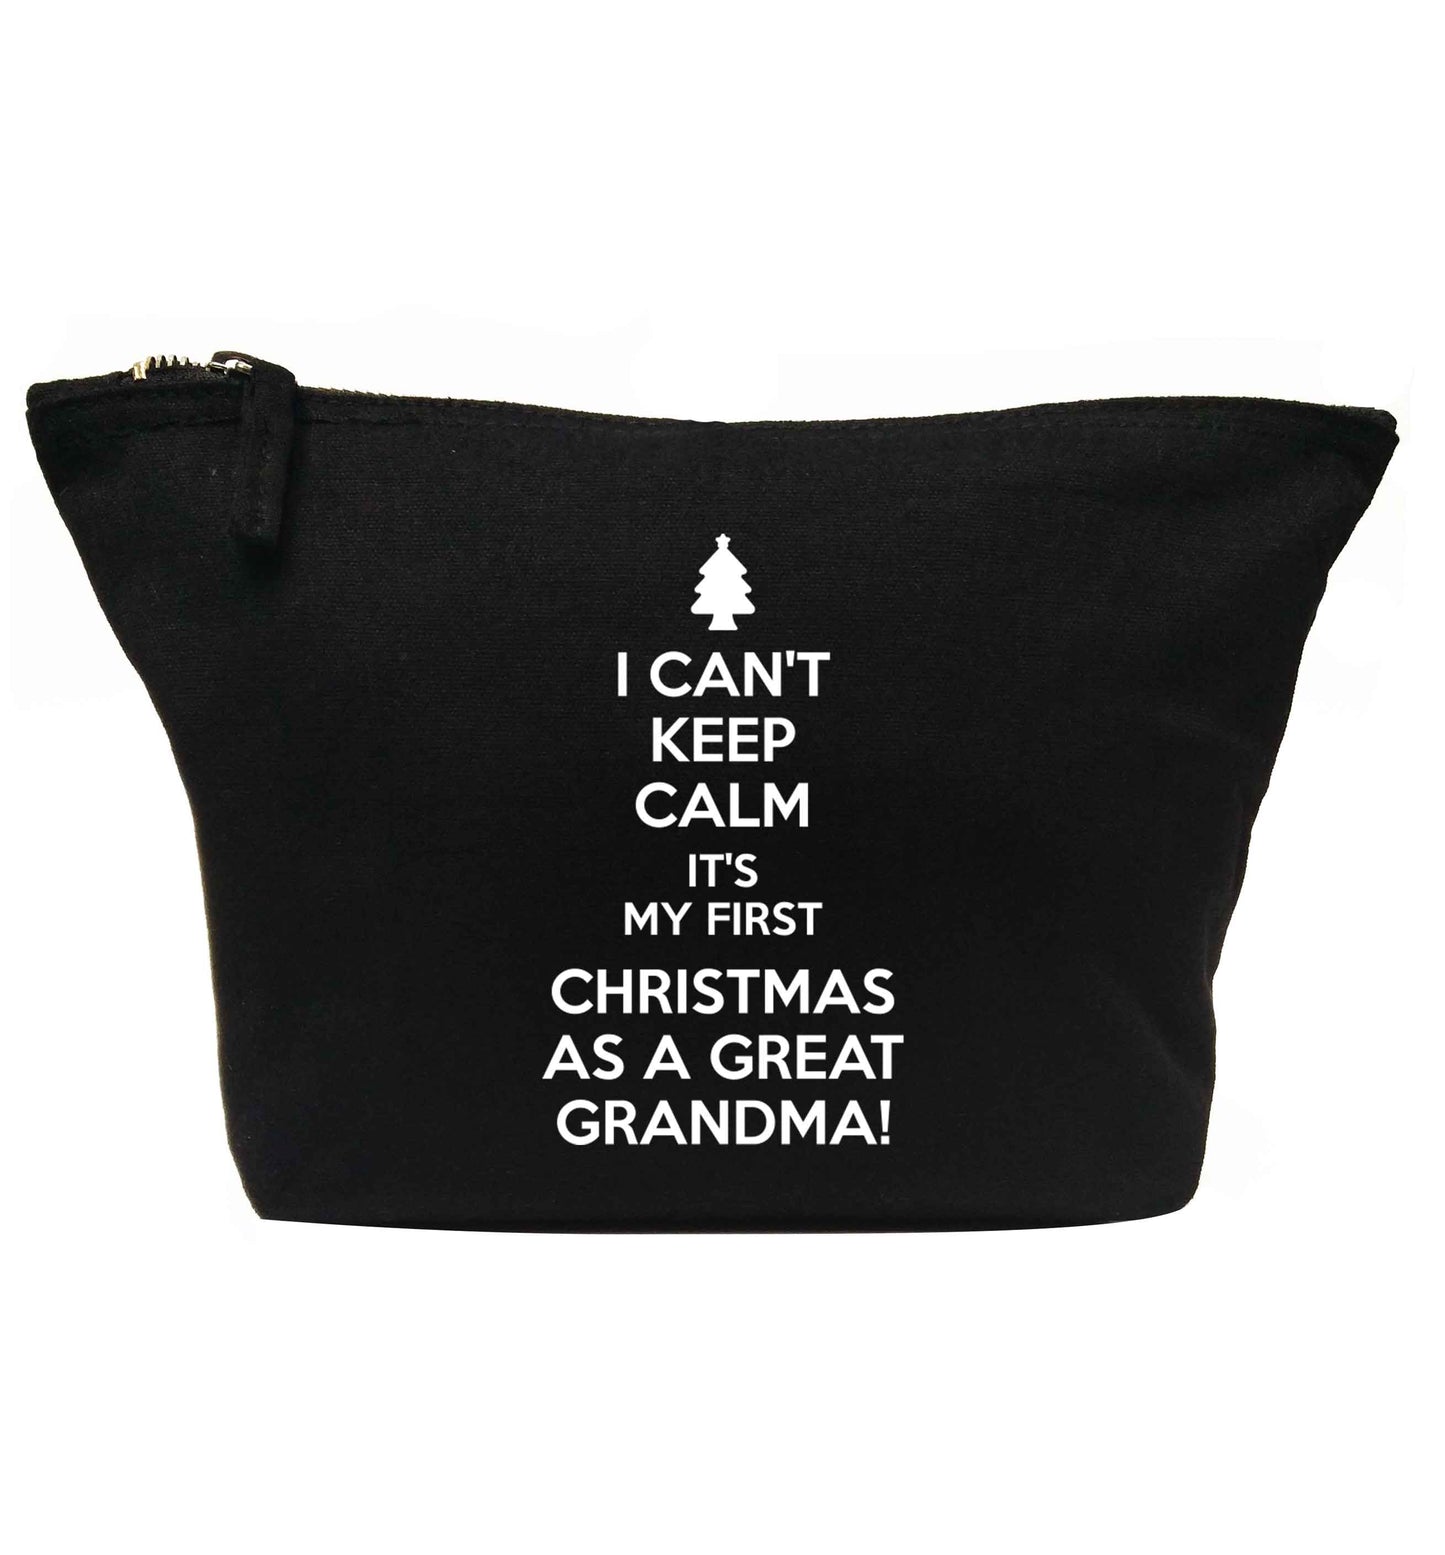 I can't keep calm it's my first Christmas as a great grandma! | makeup / wash bag